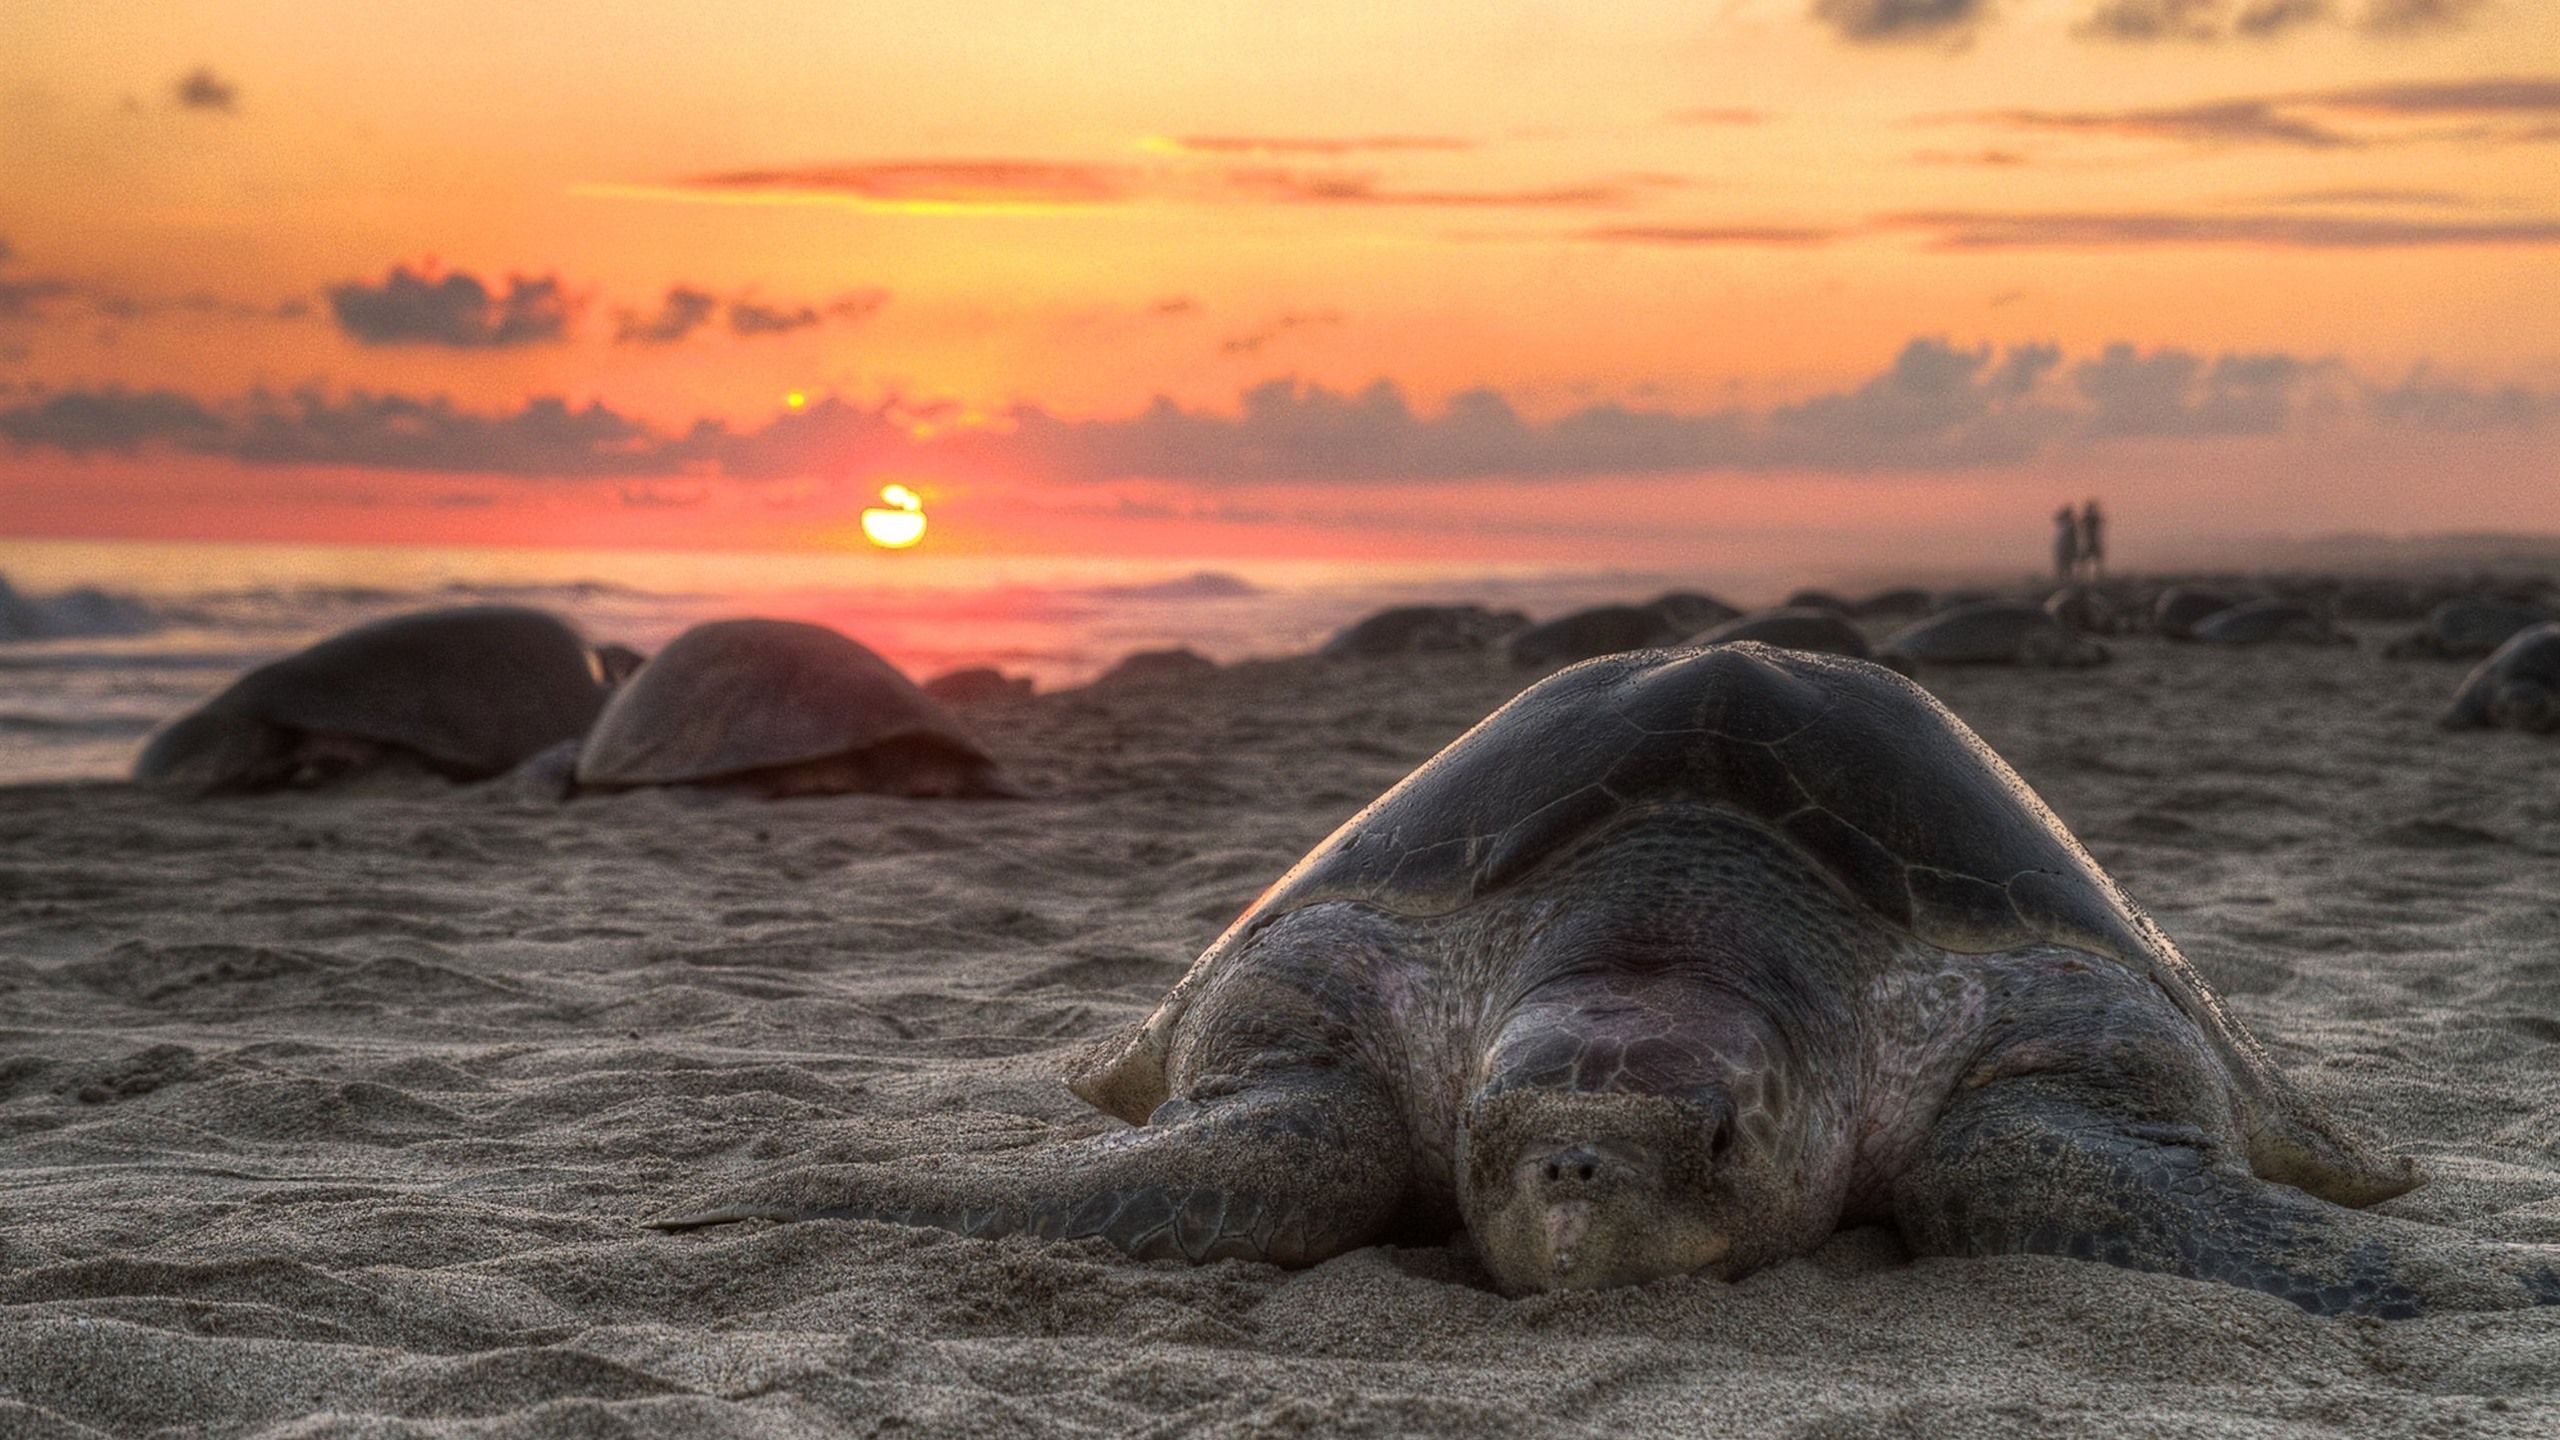 Wallpaper Turtle, beach, sunset 2560x1600 HD Picture, Image